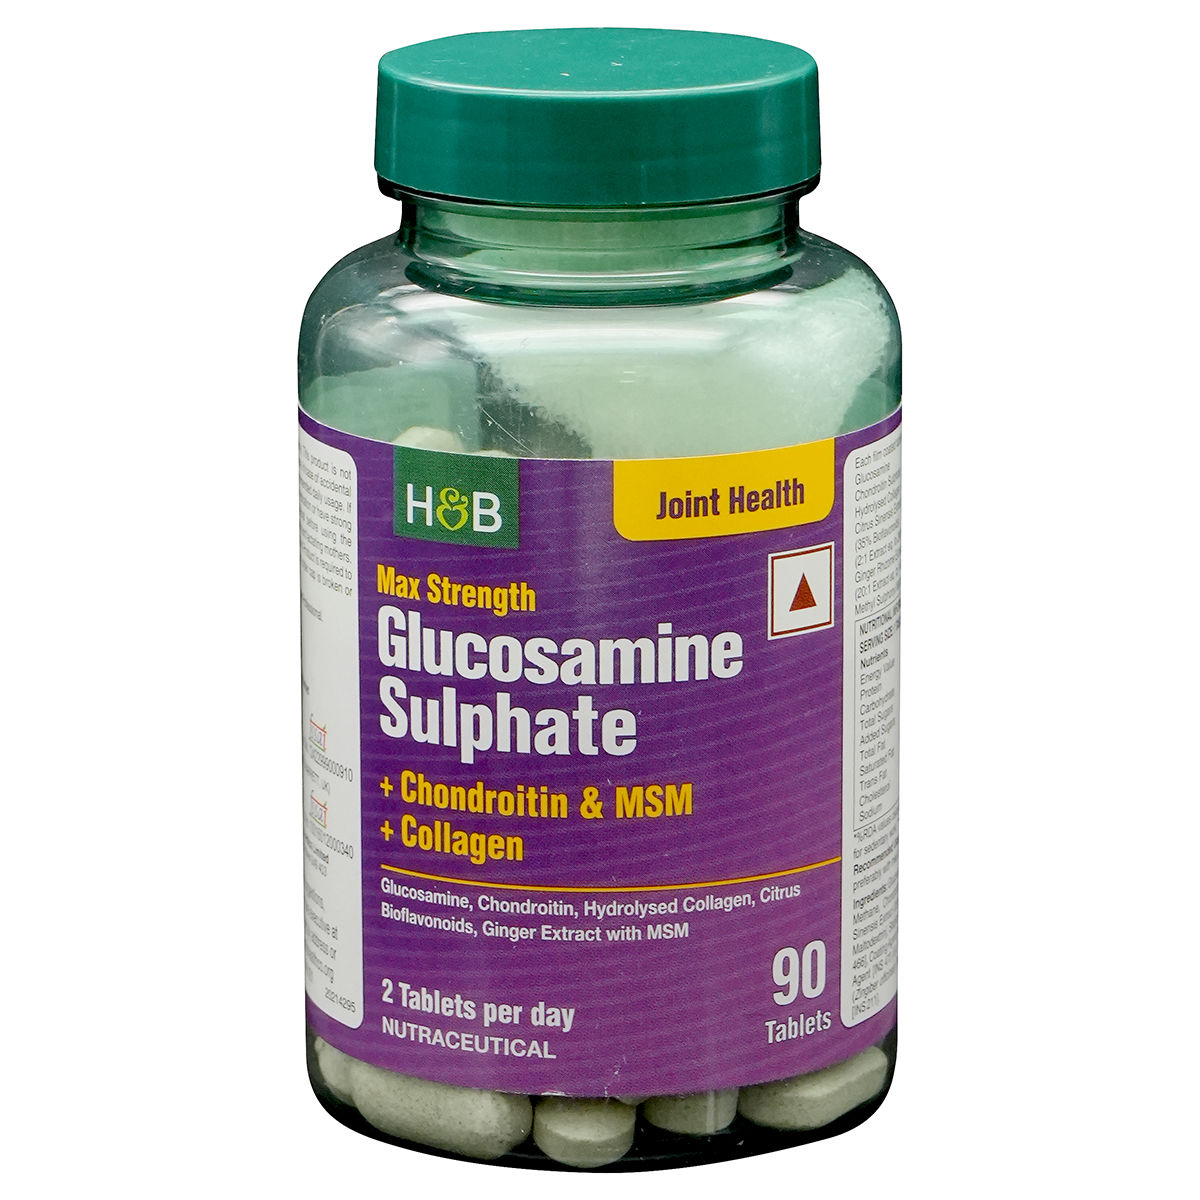 Buy Holland & Barrett Max Strength Glucosamine Sulphate for Joint Health, 90 Tablets Online